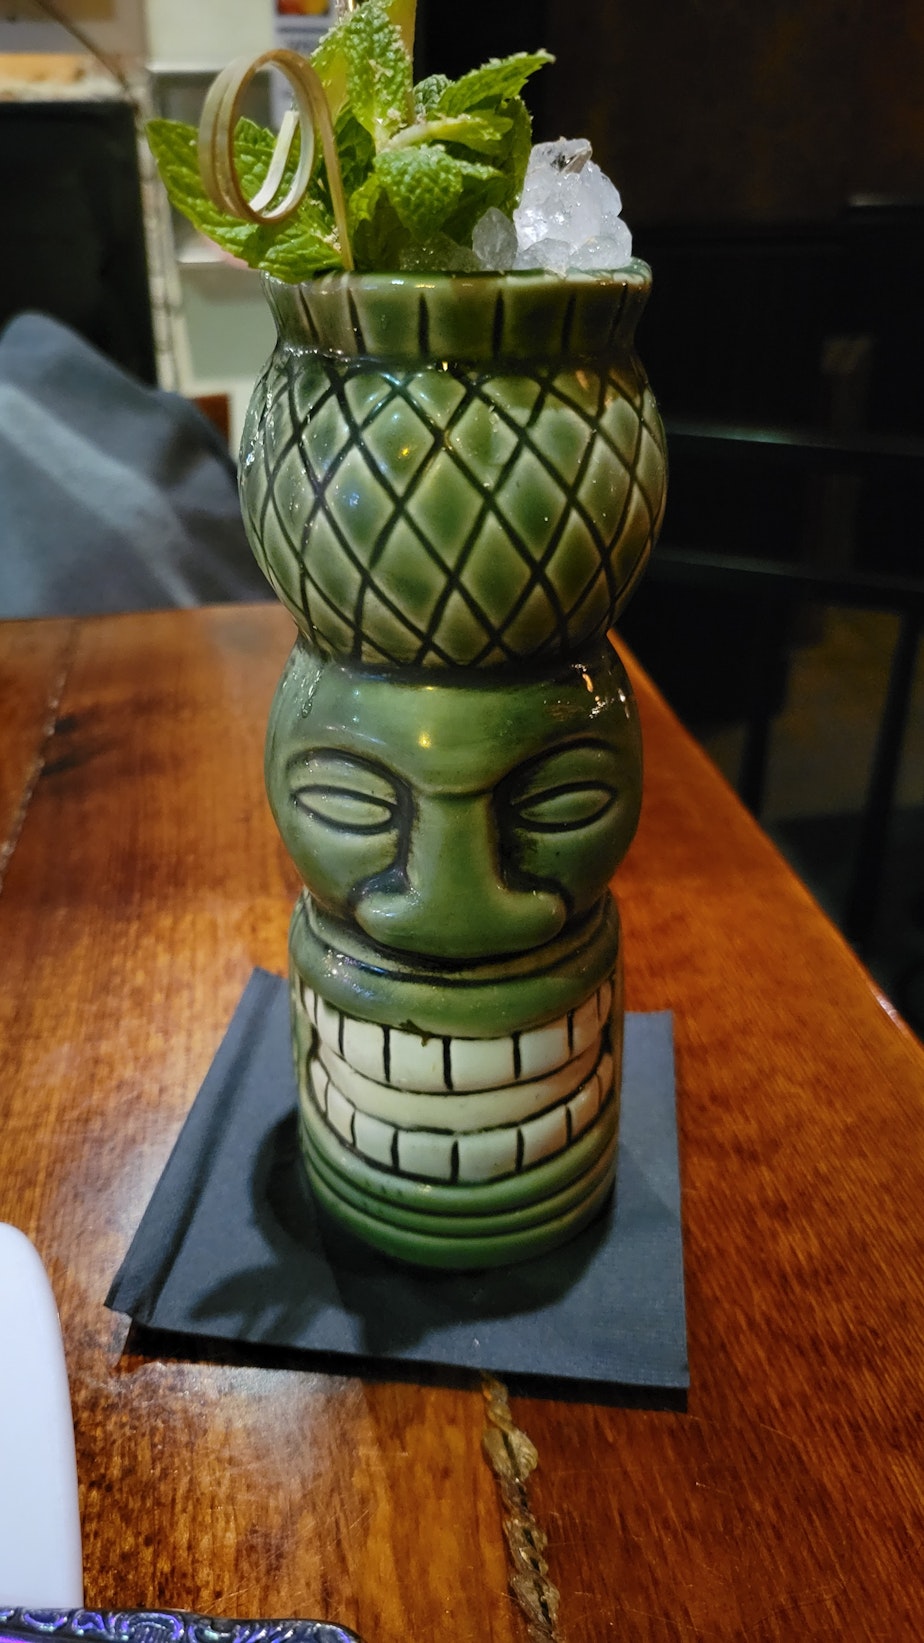 caption: The "Spirited Away" at Herb & Bitter- A non-alcoholic version of a "Mai Tai," made with Pathfinder NA Amaro.